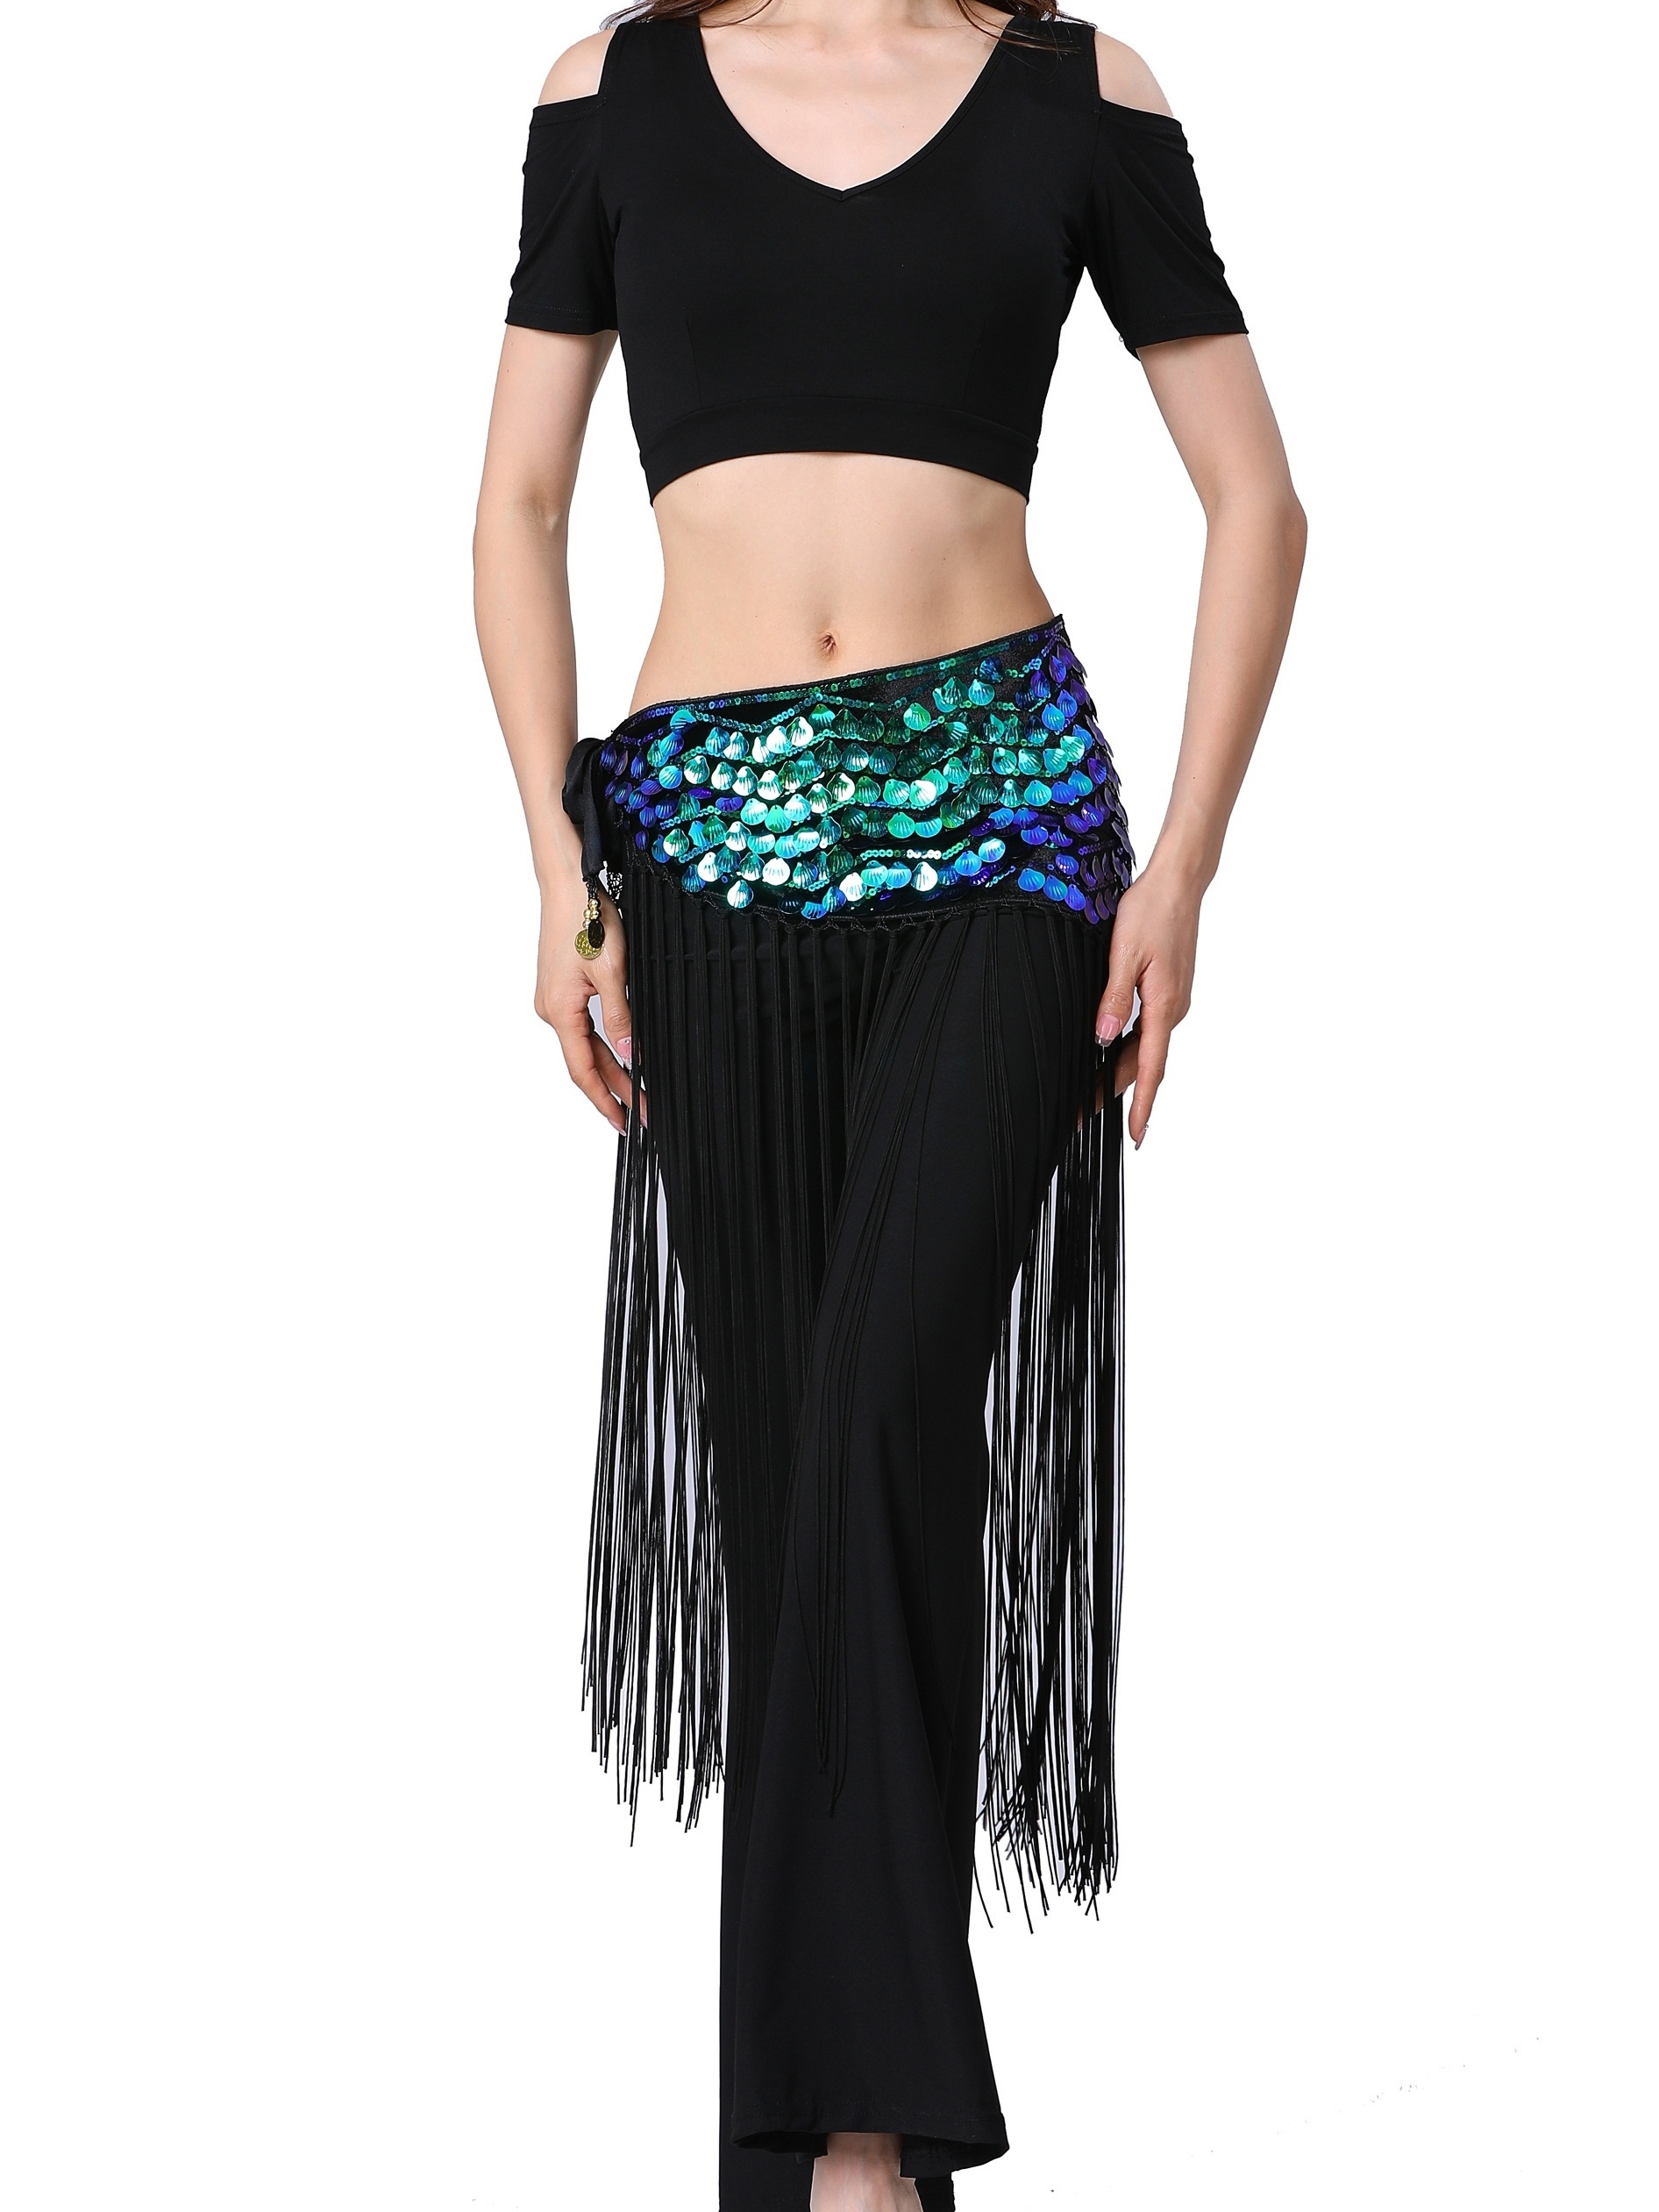 Black Sequin Pants, Rave Clothing at Affordable Prices